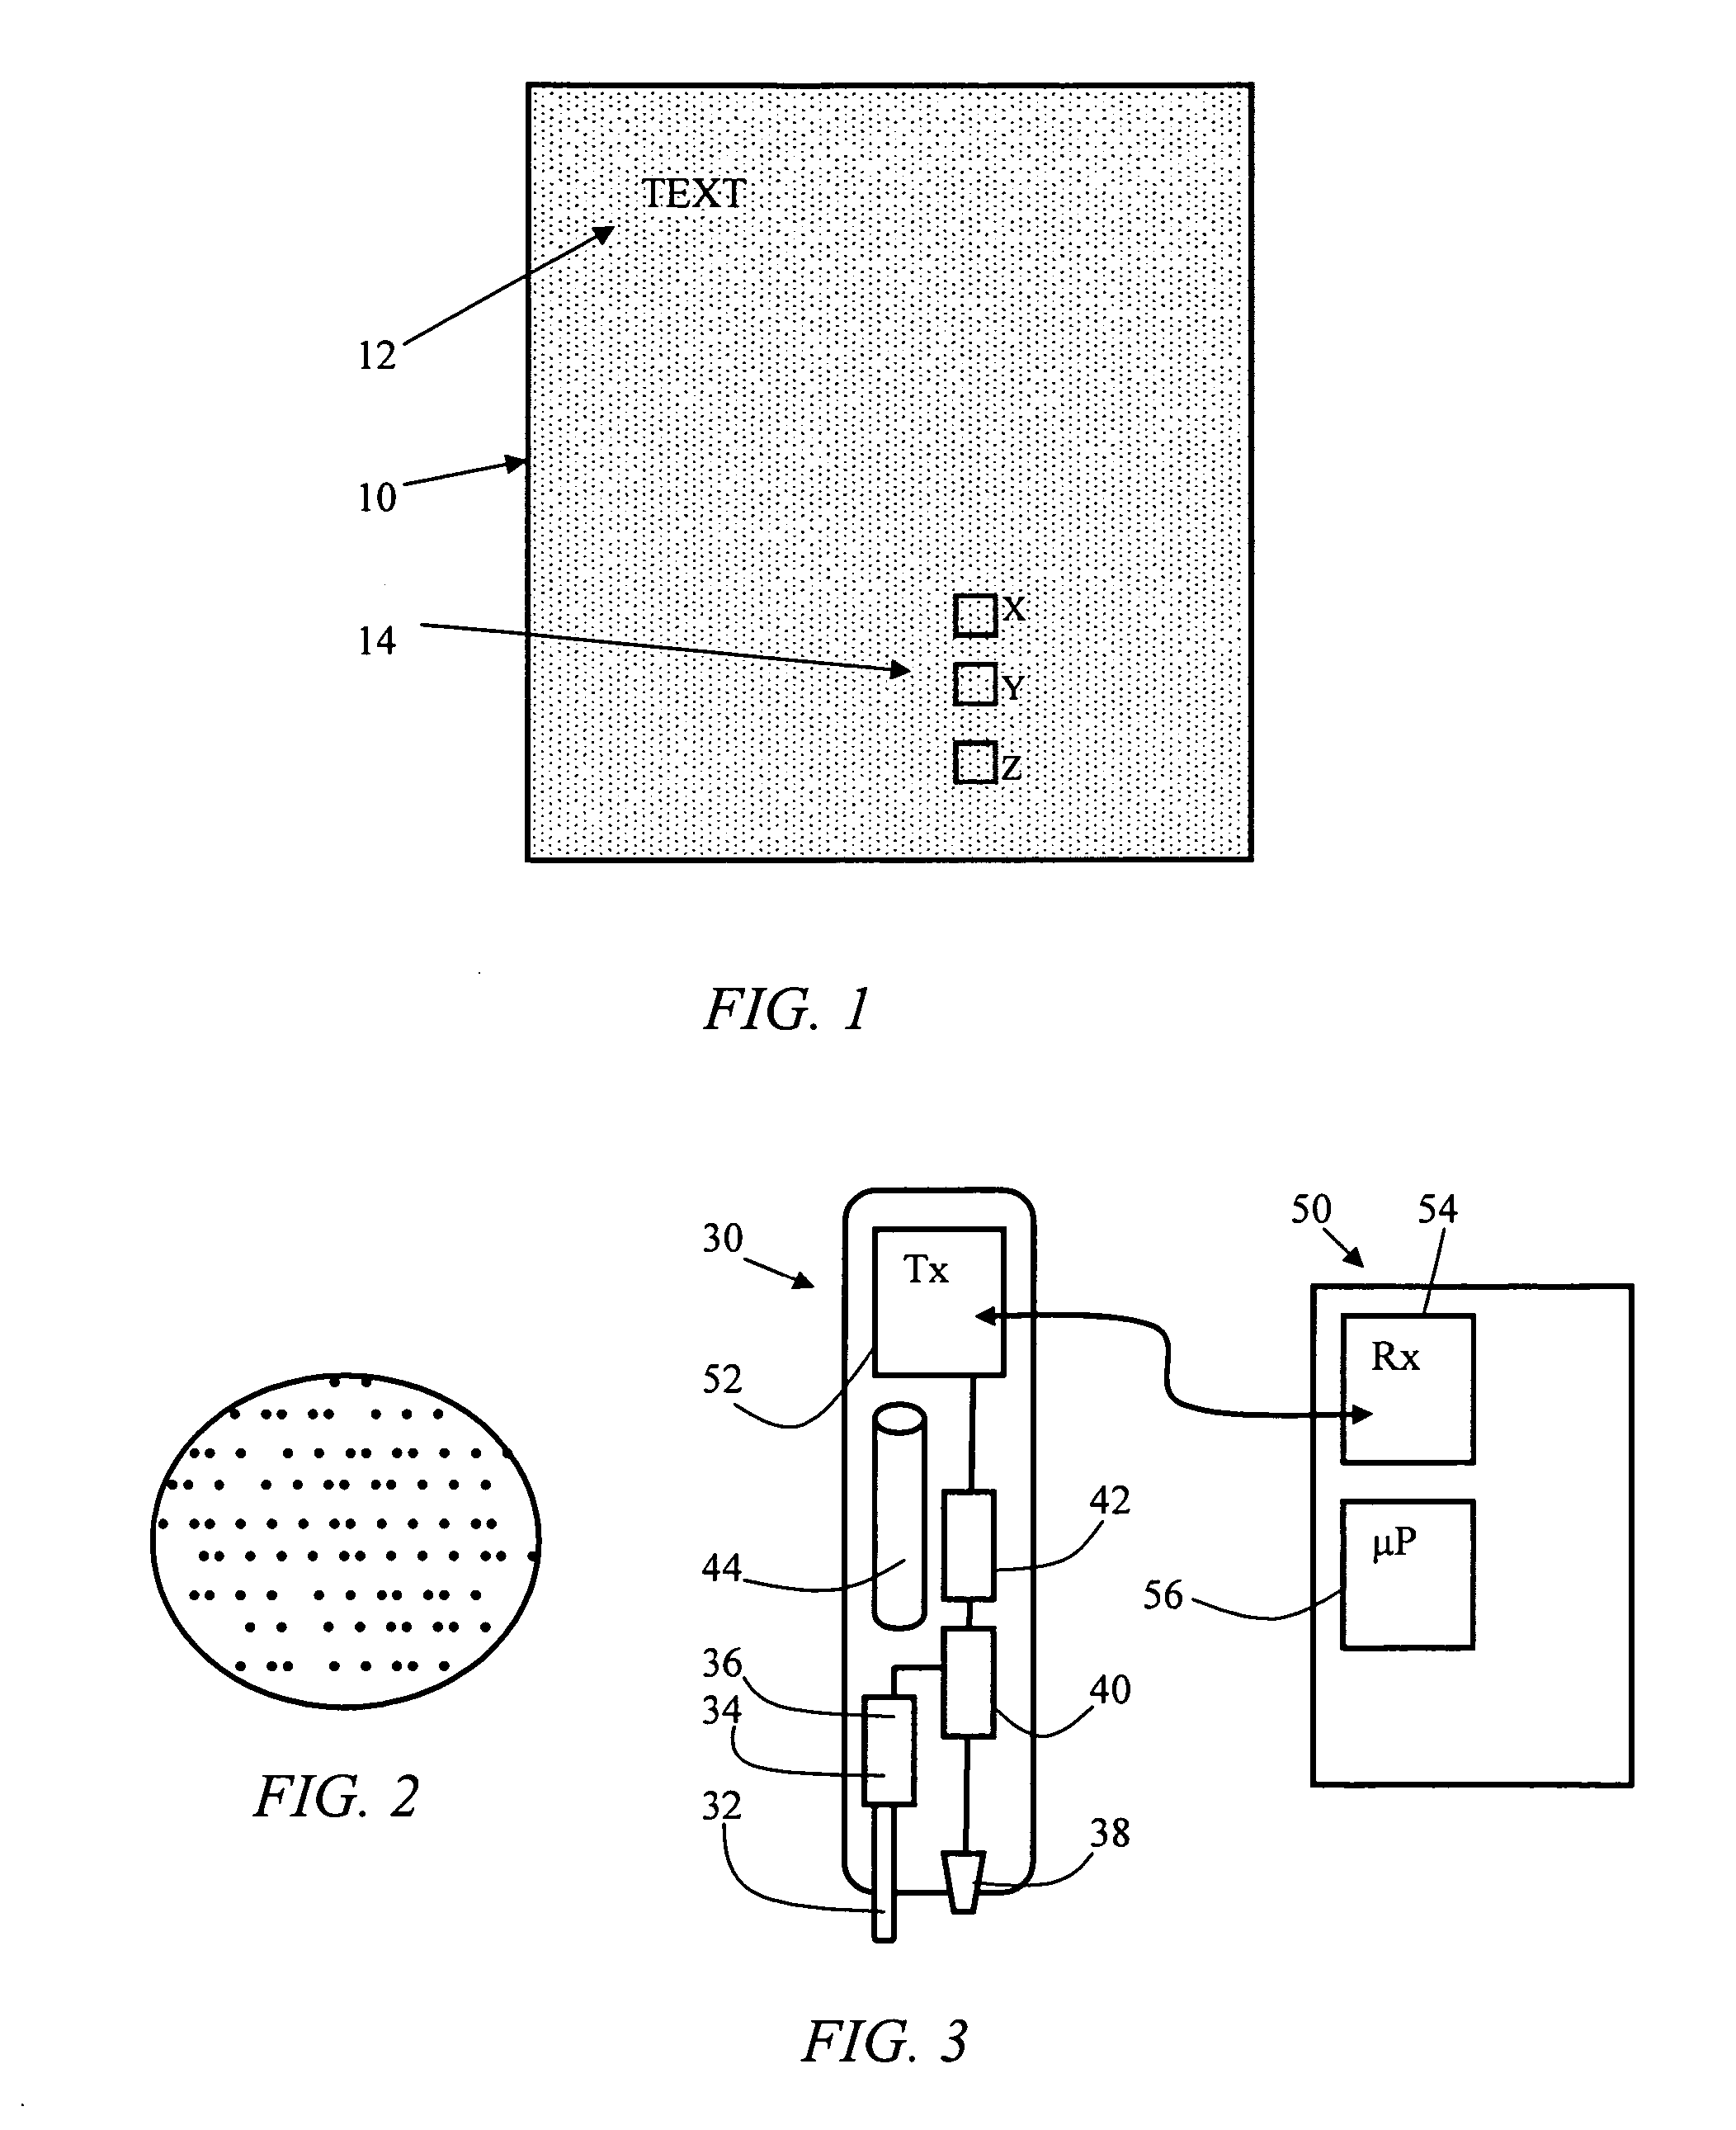 Substrates having a position encoding pattern